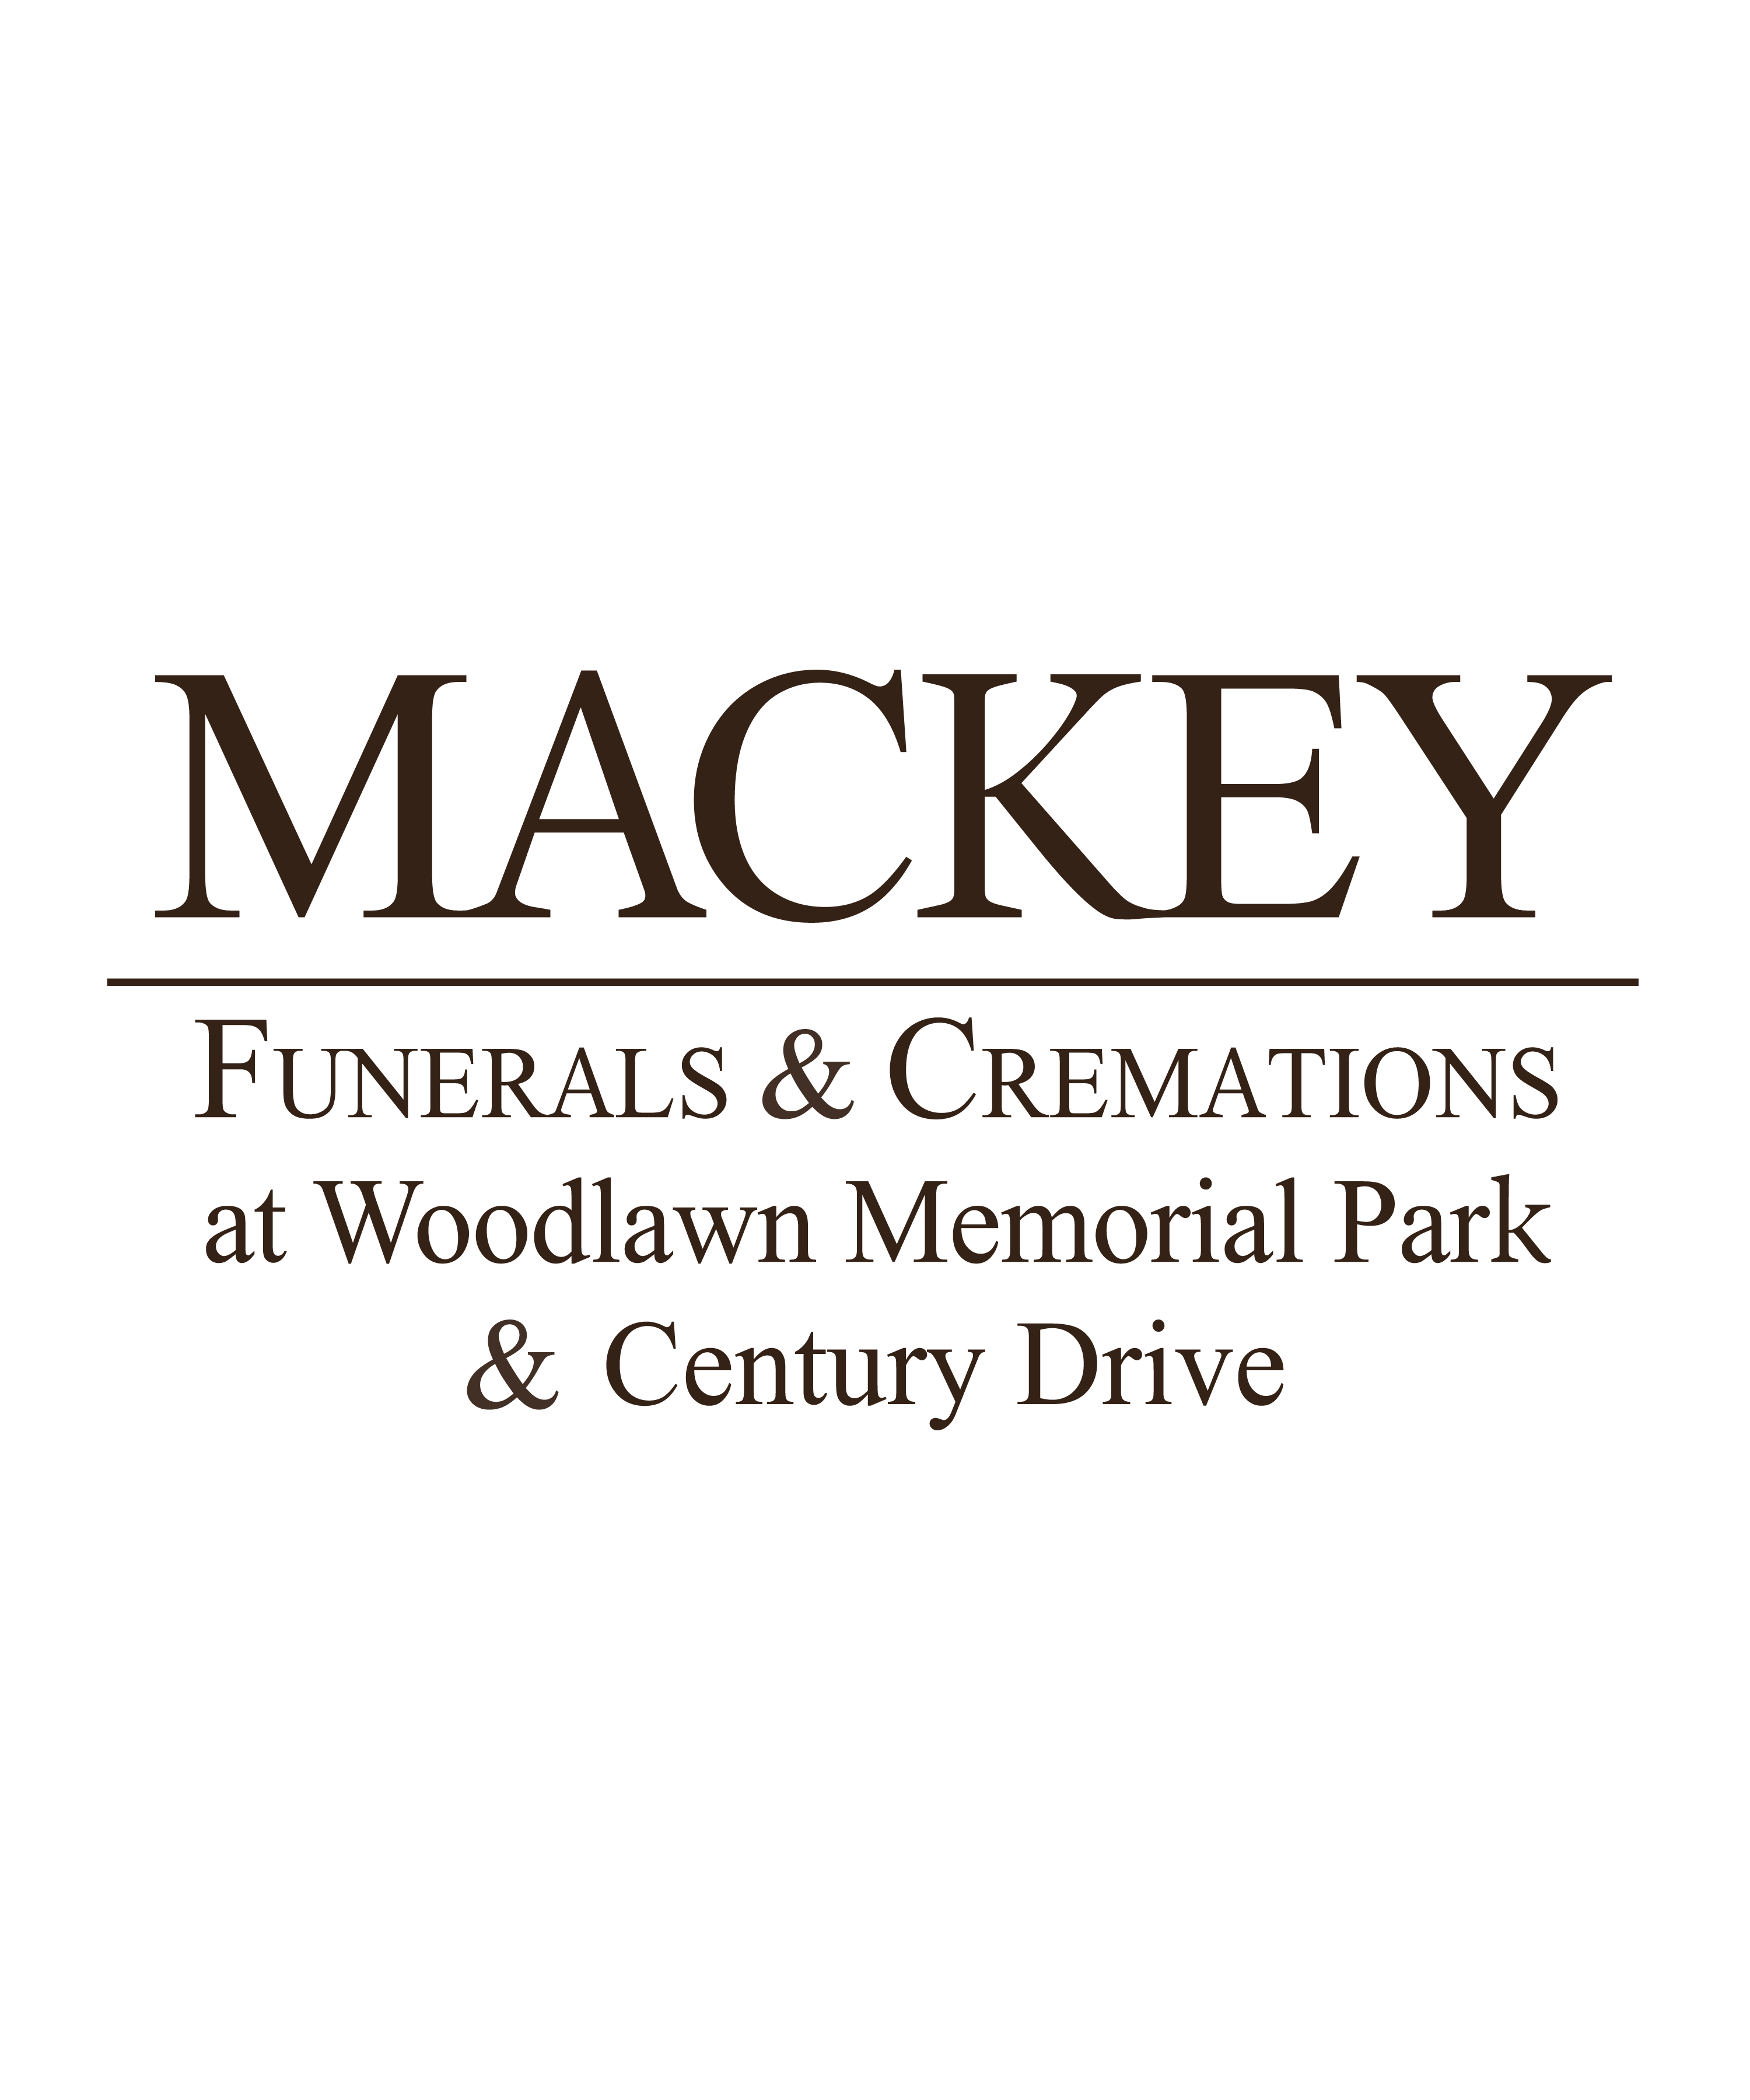 Mackey Funerals & Cremations at Century Dr. & Woodlawn Memorial Park